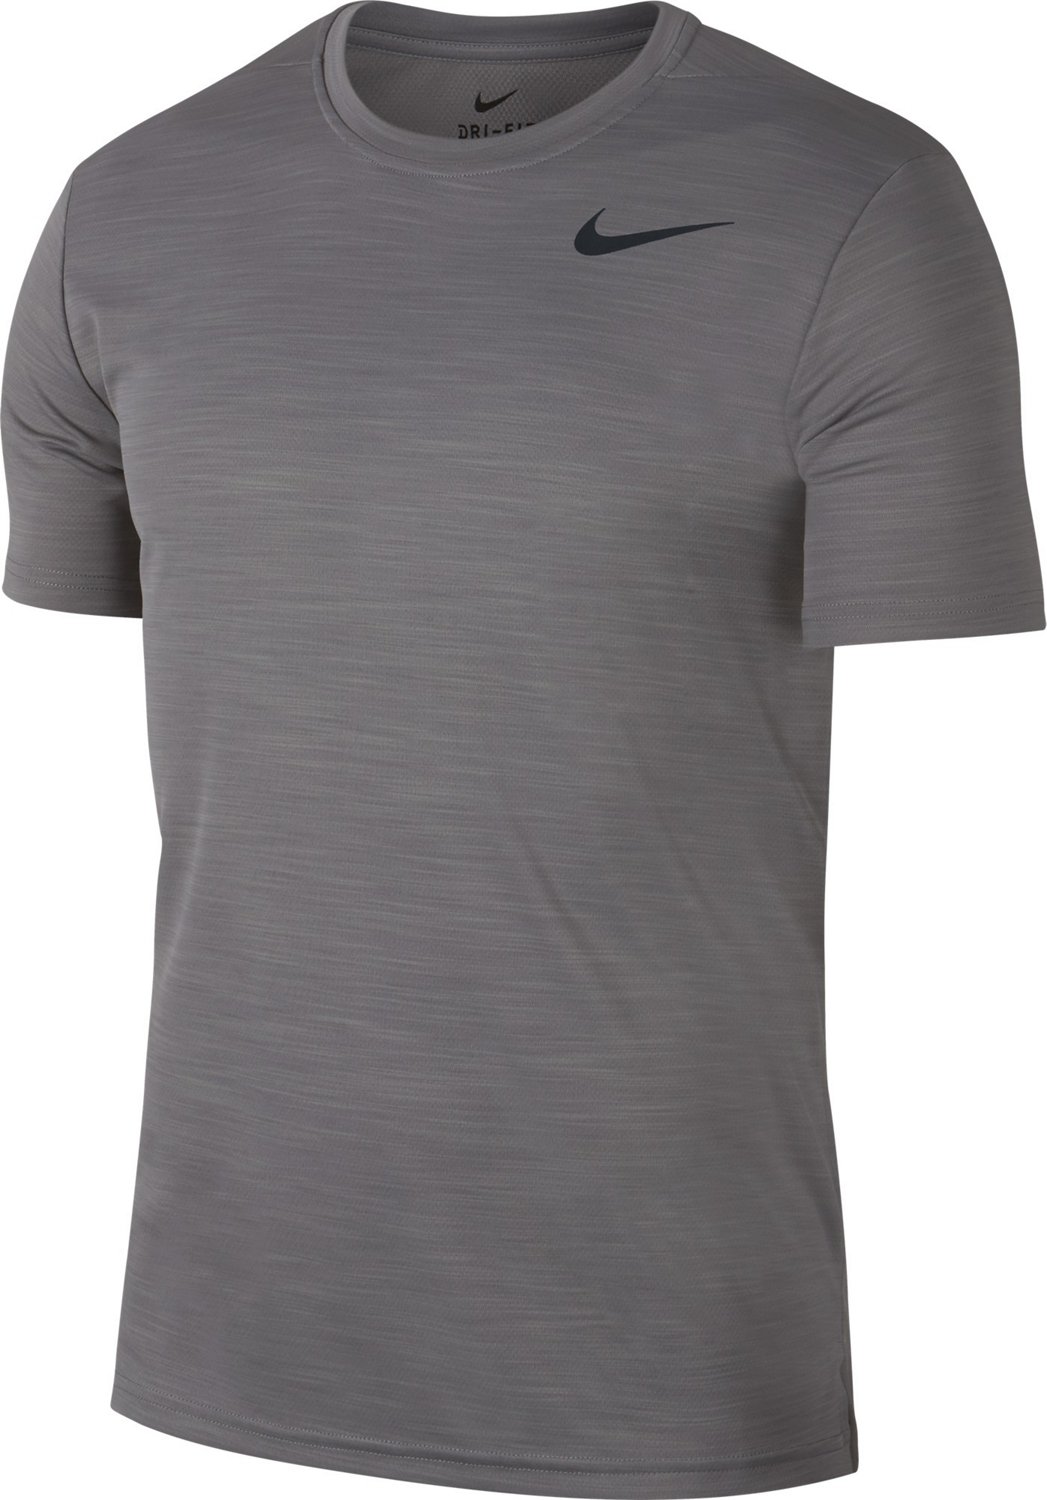 Search Results - Grey Nike shirt | Academy